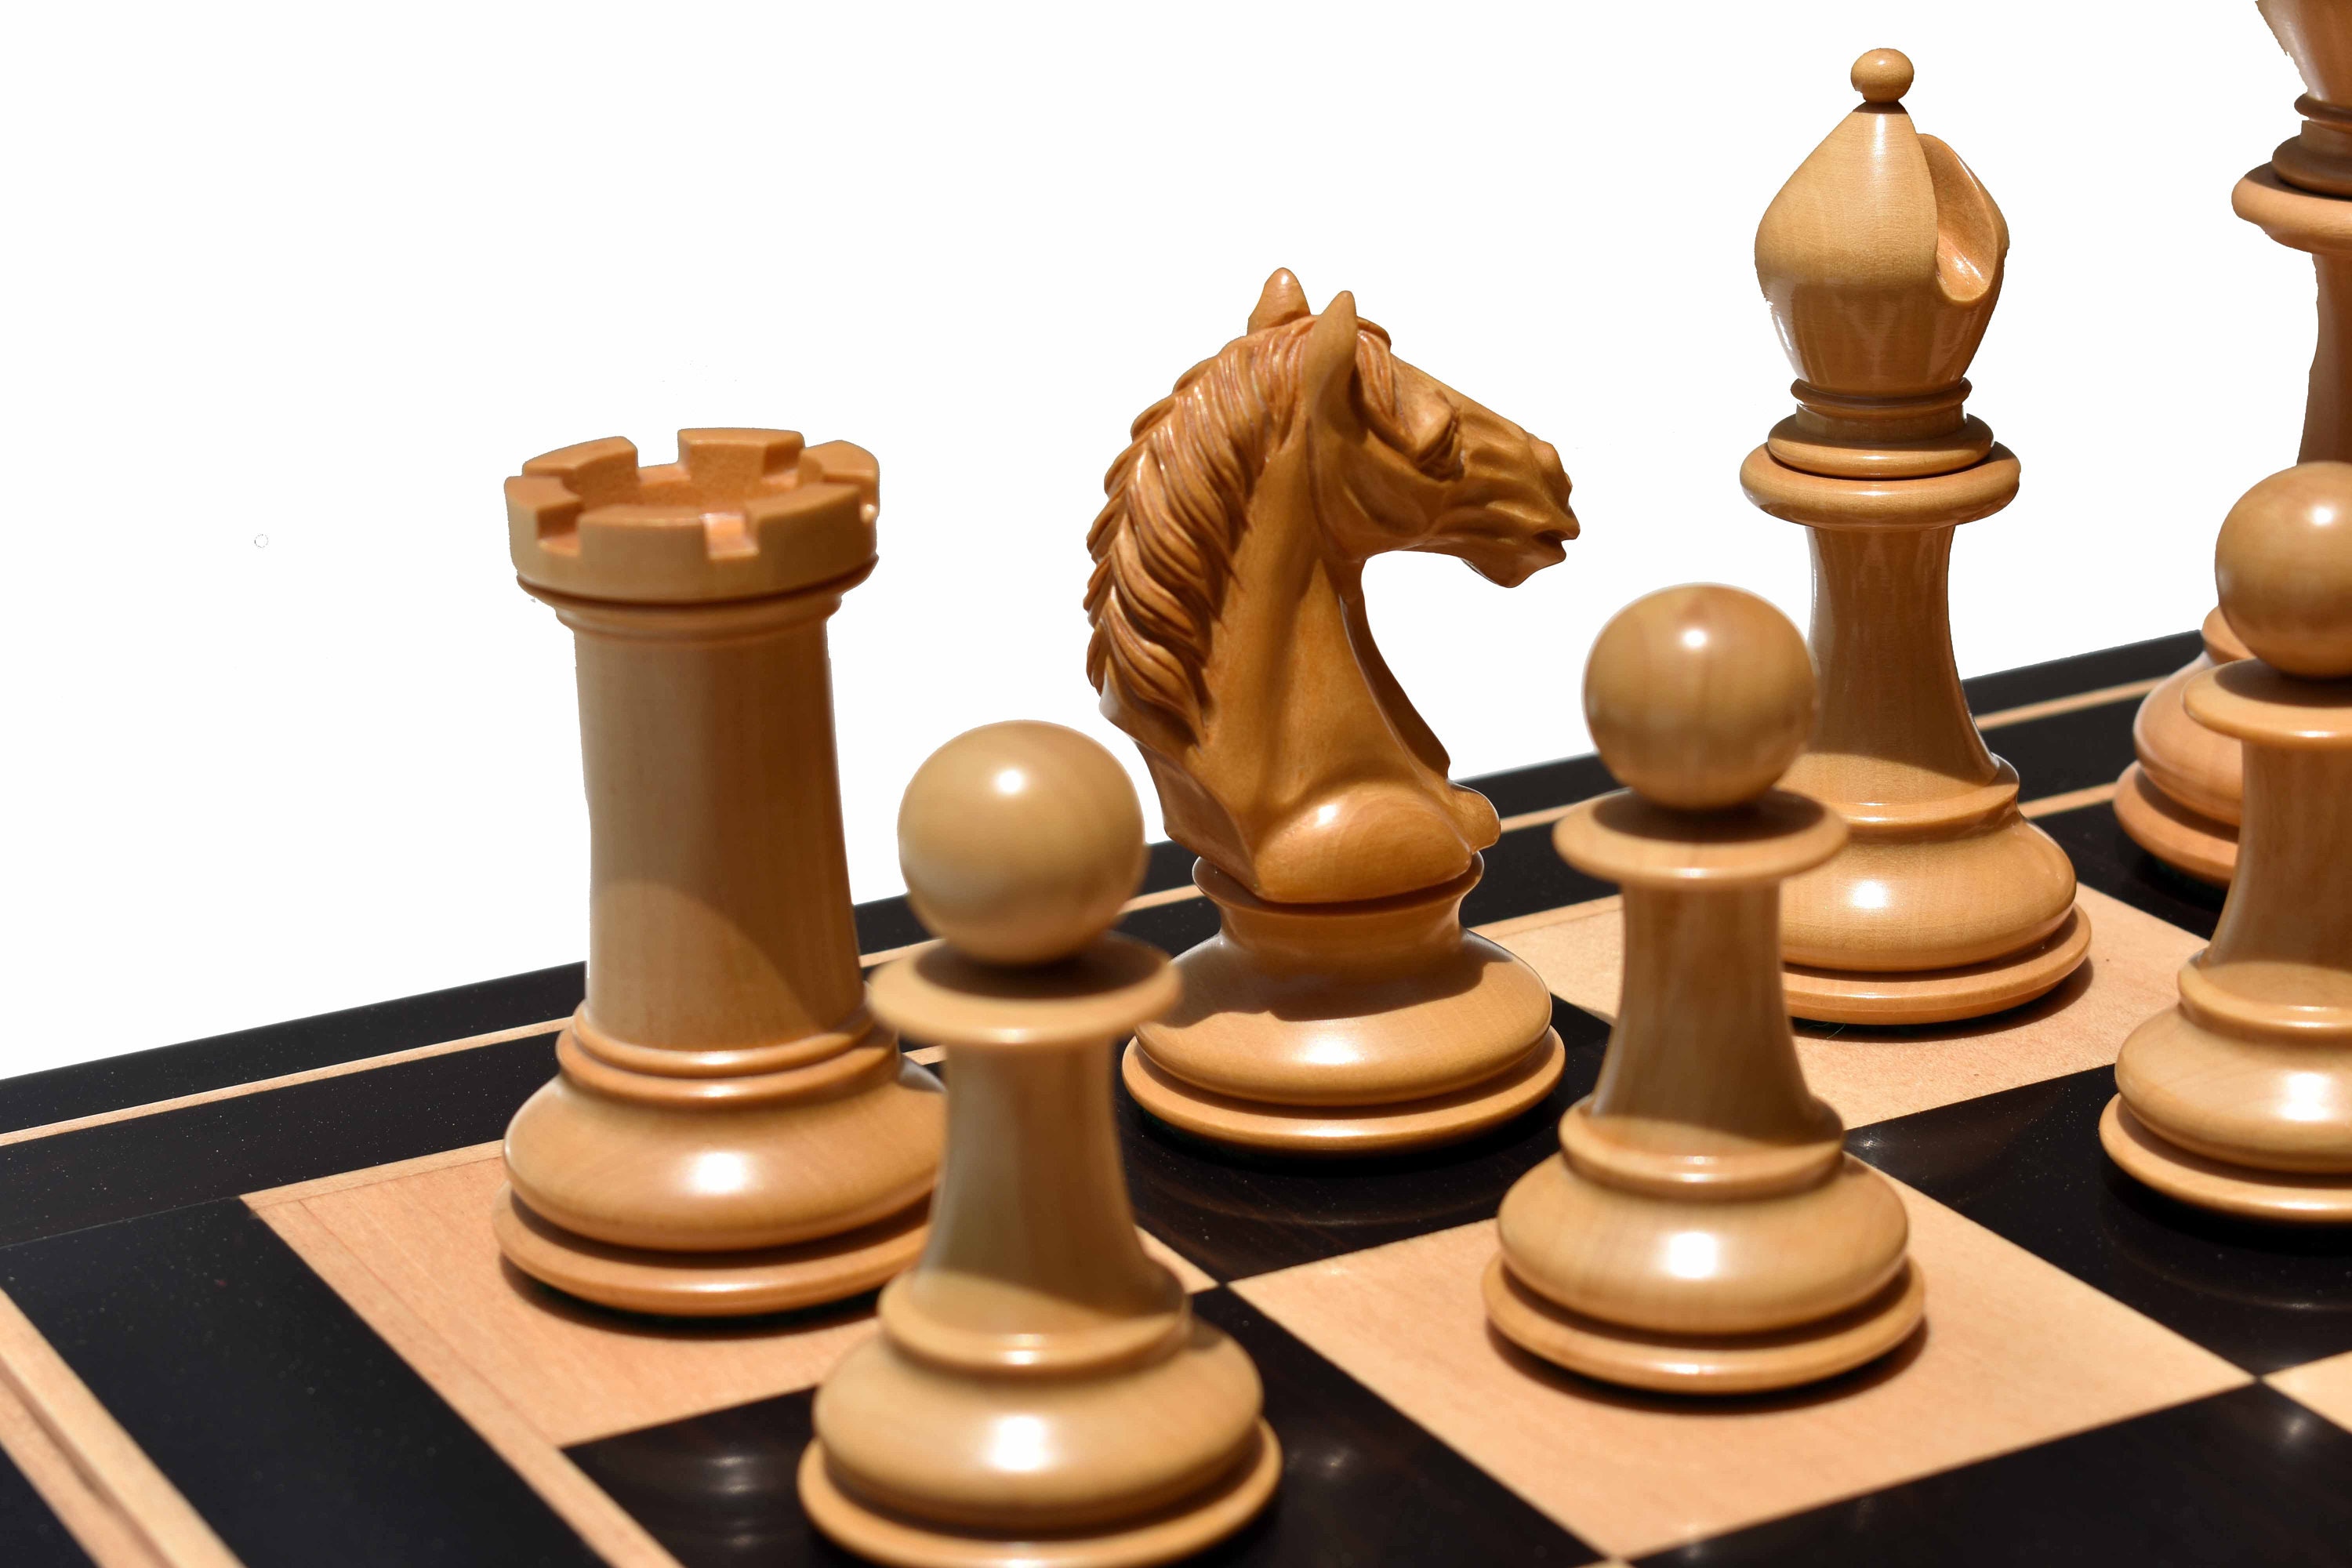 Chess set - The Conqueror Chess pieces - Iconic 1960's chess set design - Chess  pieces only - Made to order